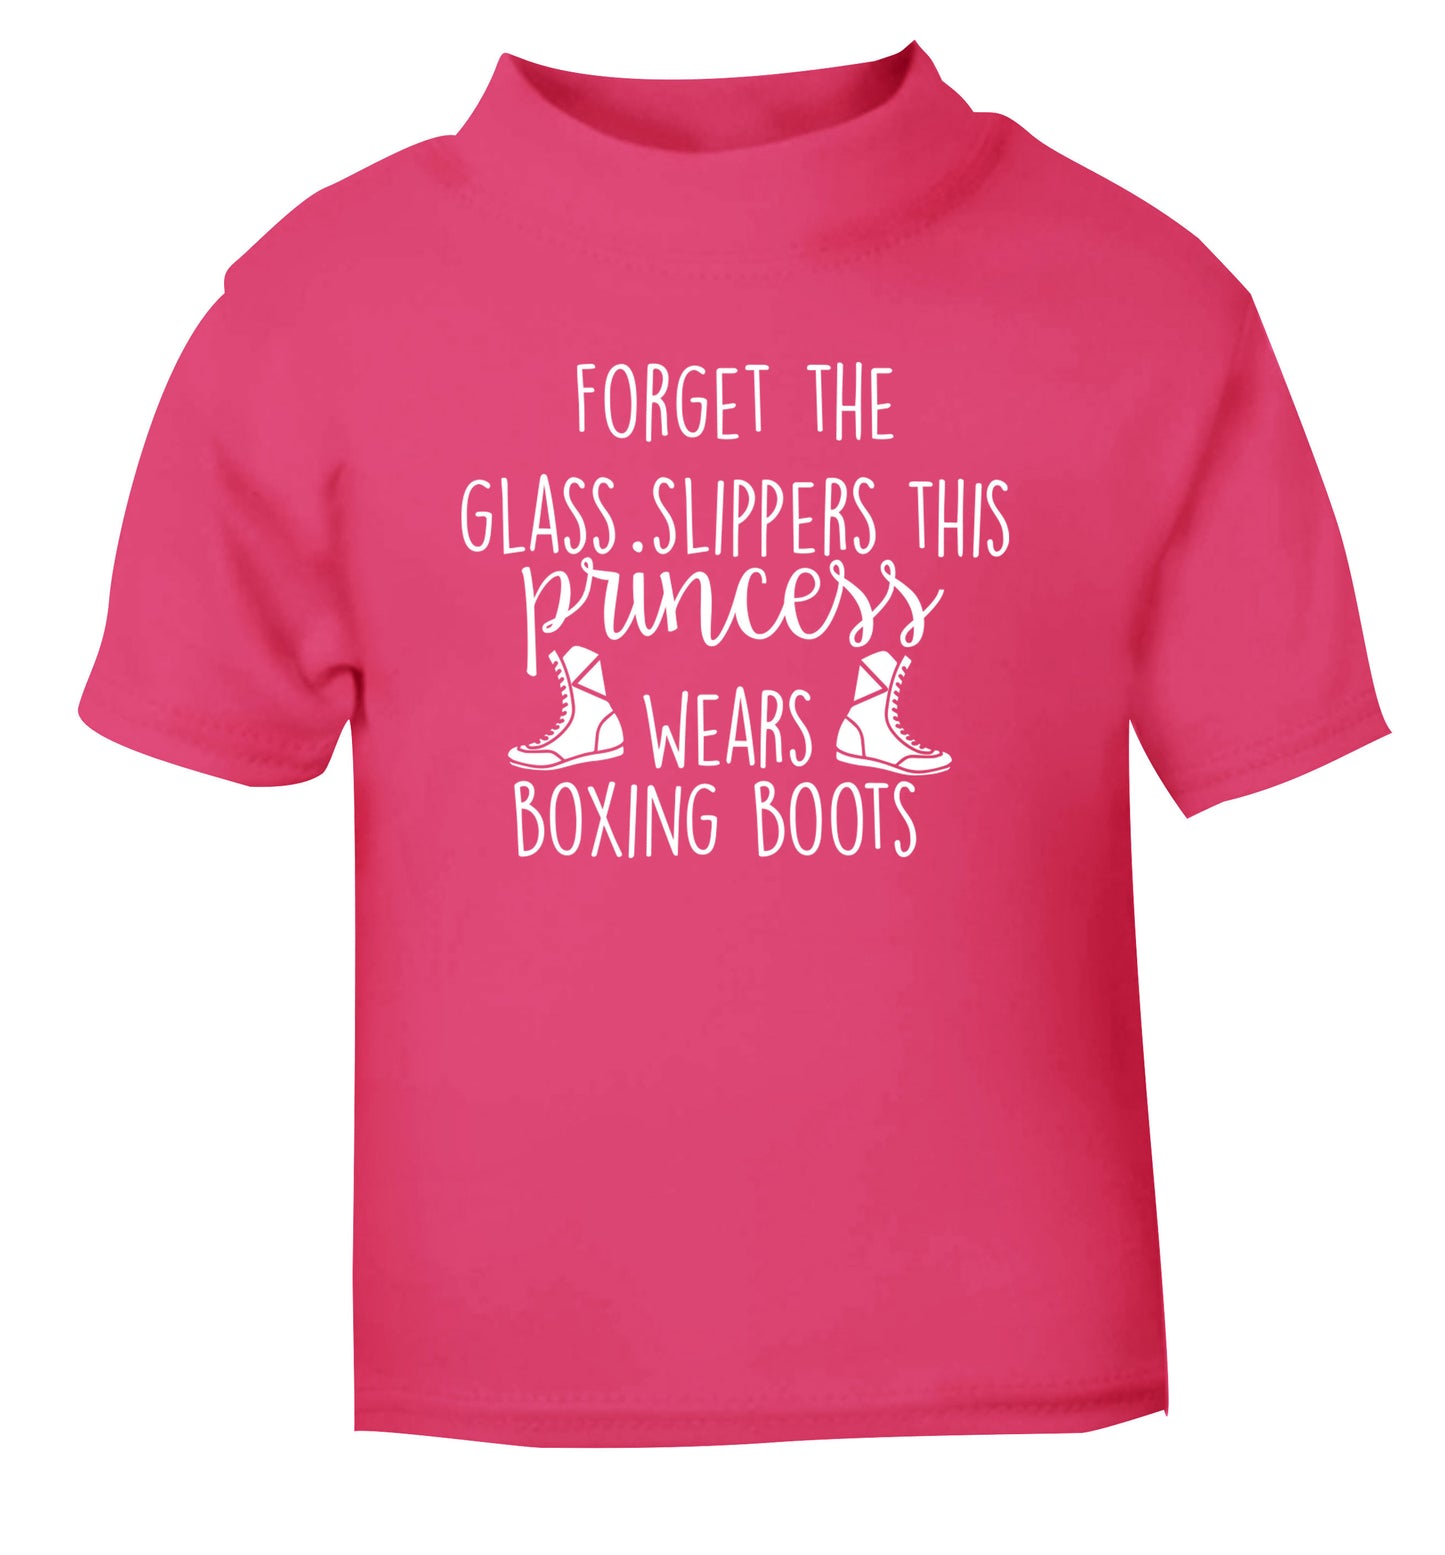 Forget the glass slippers this princess wears boxing boots pink Baby Toddler Tshirt 2 Years